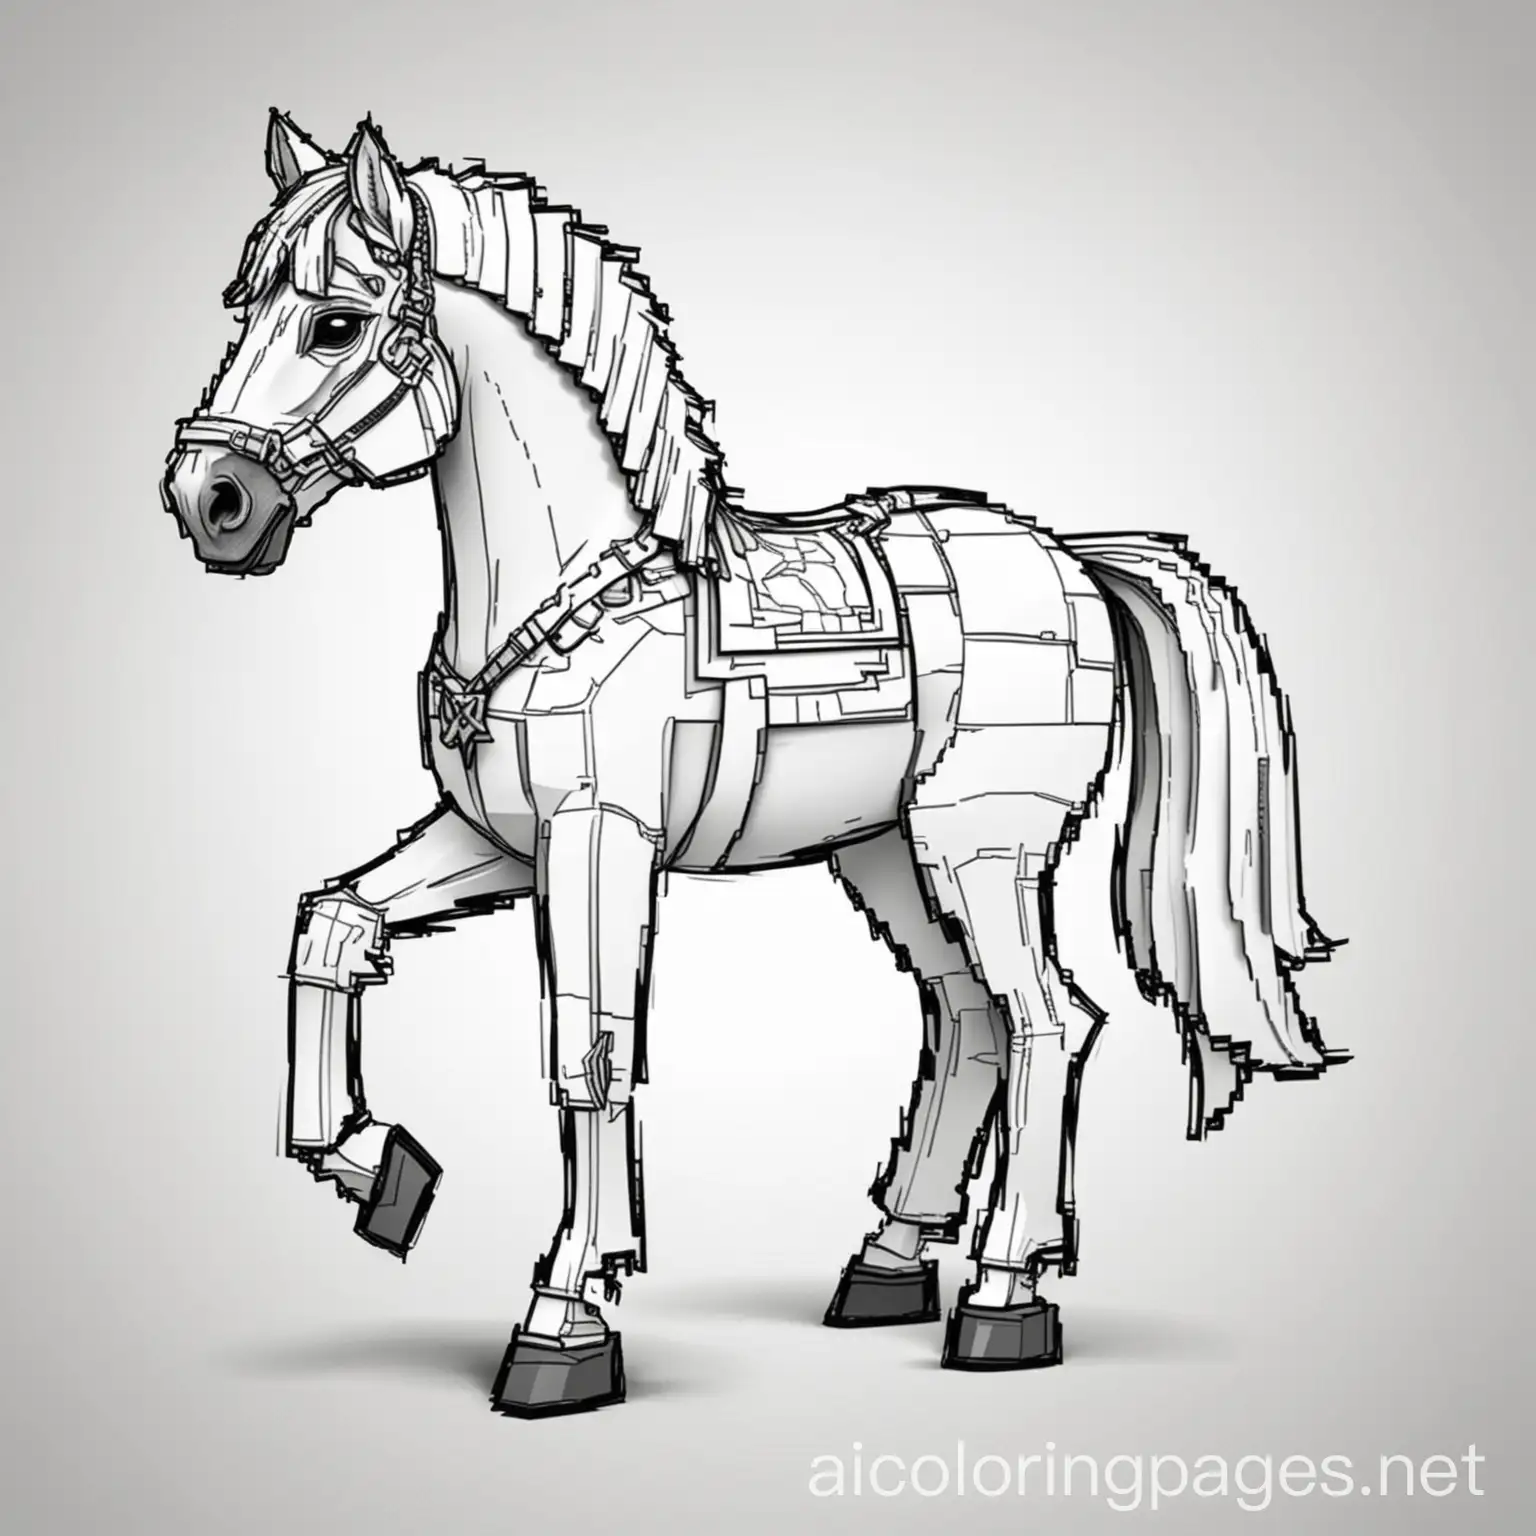 minecraft horse, Coloring Page, black and white, line art, white background, Simplicity, Ample White Space. The background of the coloring page is plain white to make it easy for young children to color within the lines. The outlines of all the subjects are easy to distinguish, making it simple for kids to color without too much difficulty